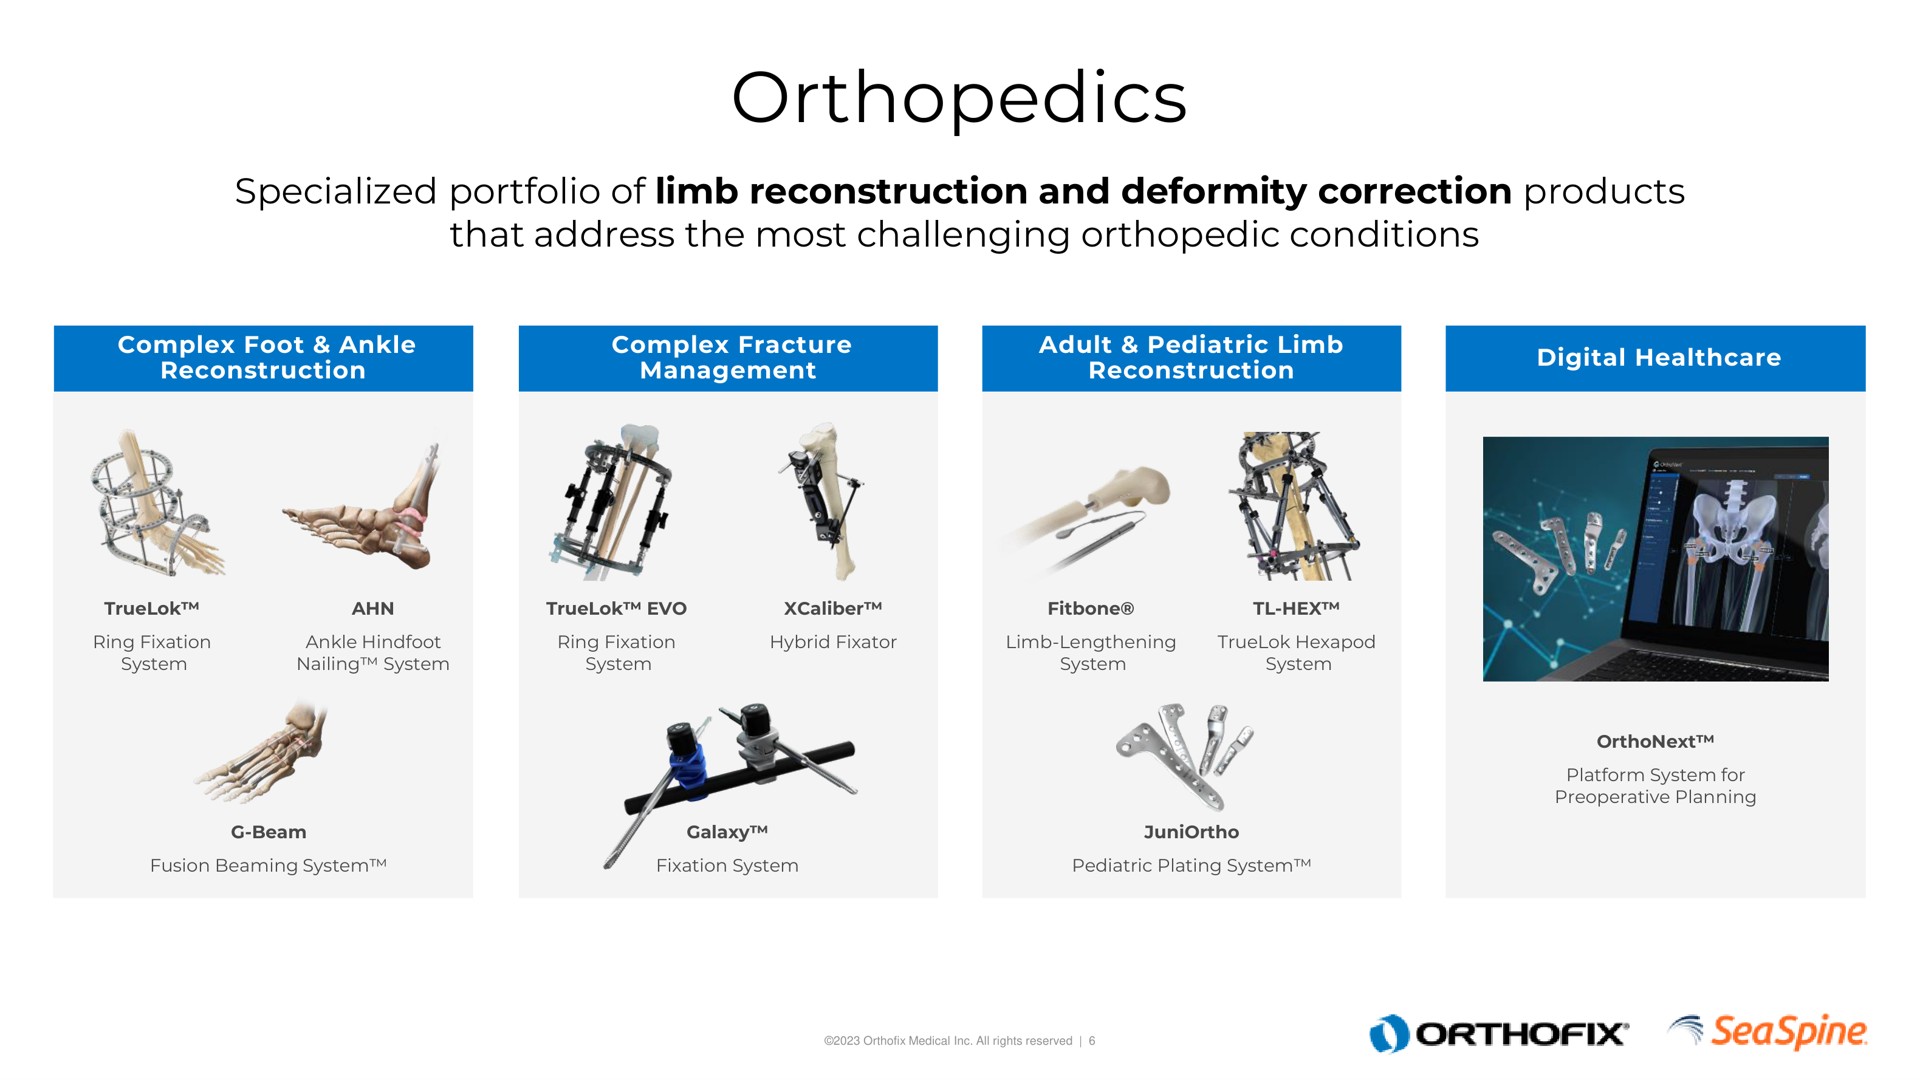 orthopedics specialized portfolio of limb reconstruction and deformity correction products that address the most challenging orthopedic conditions | Orthofix